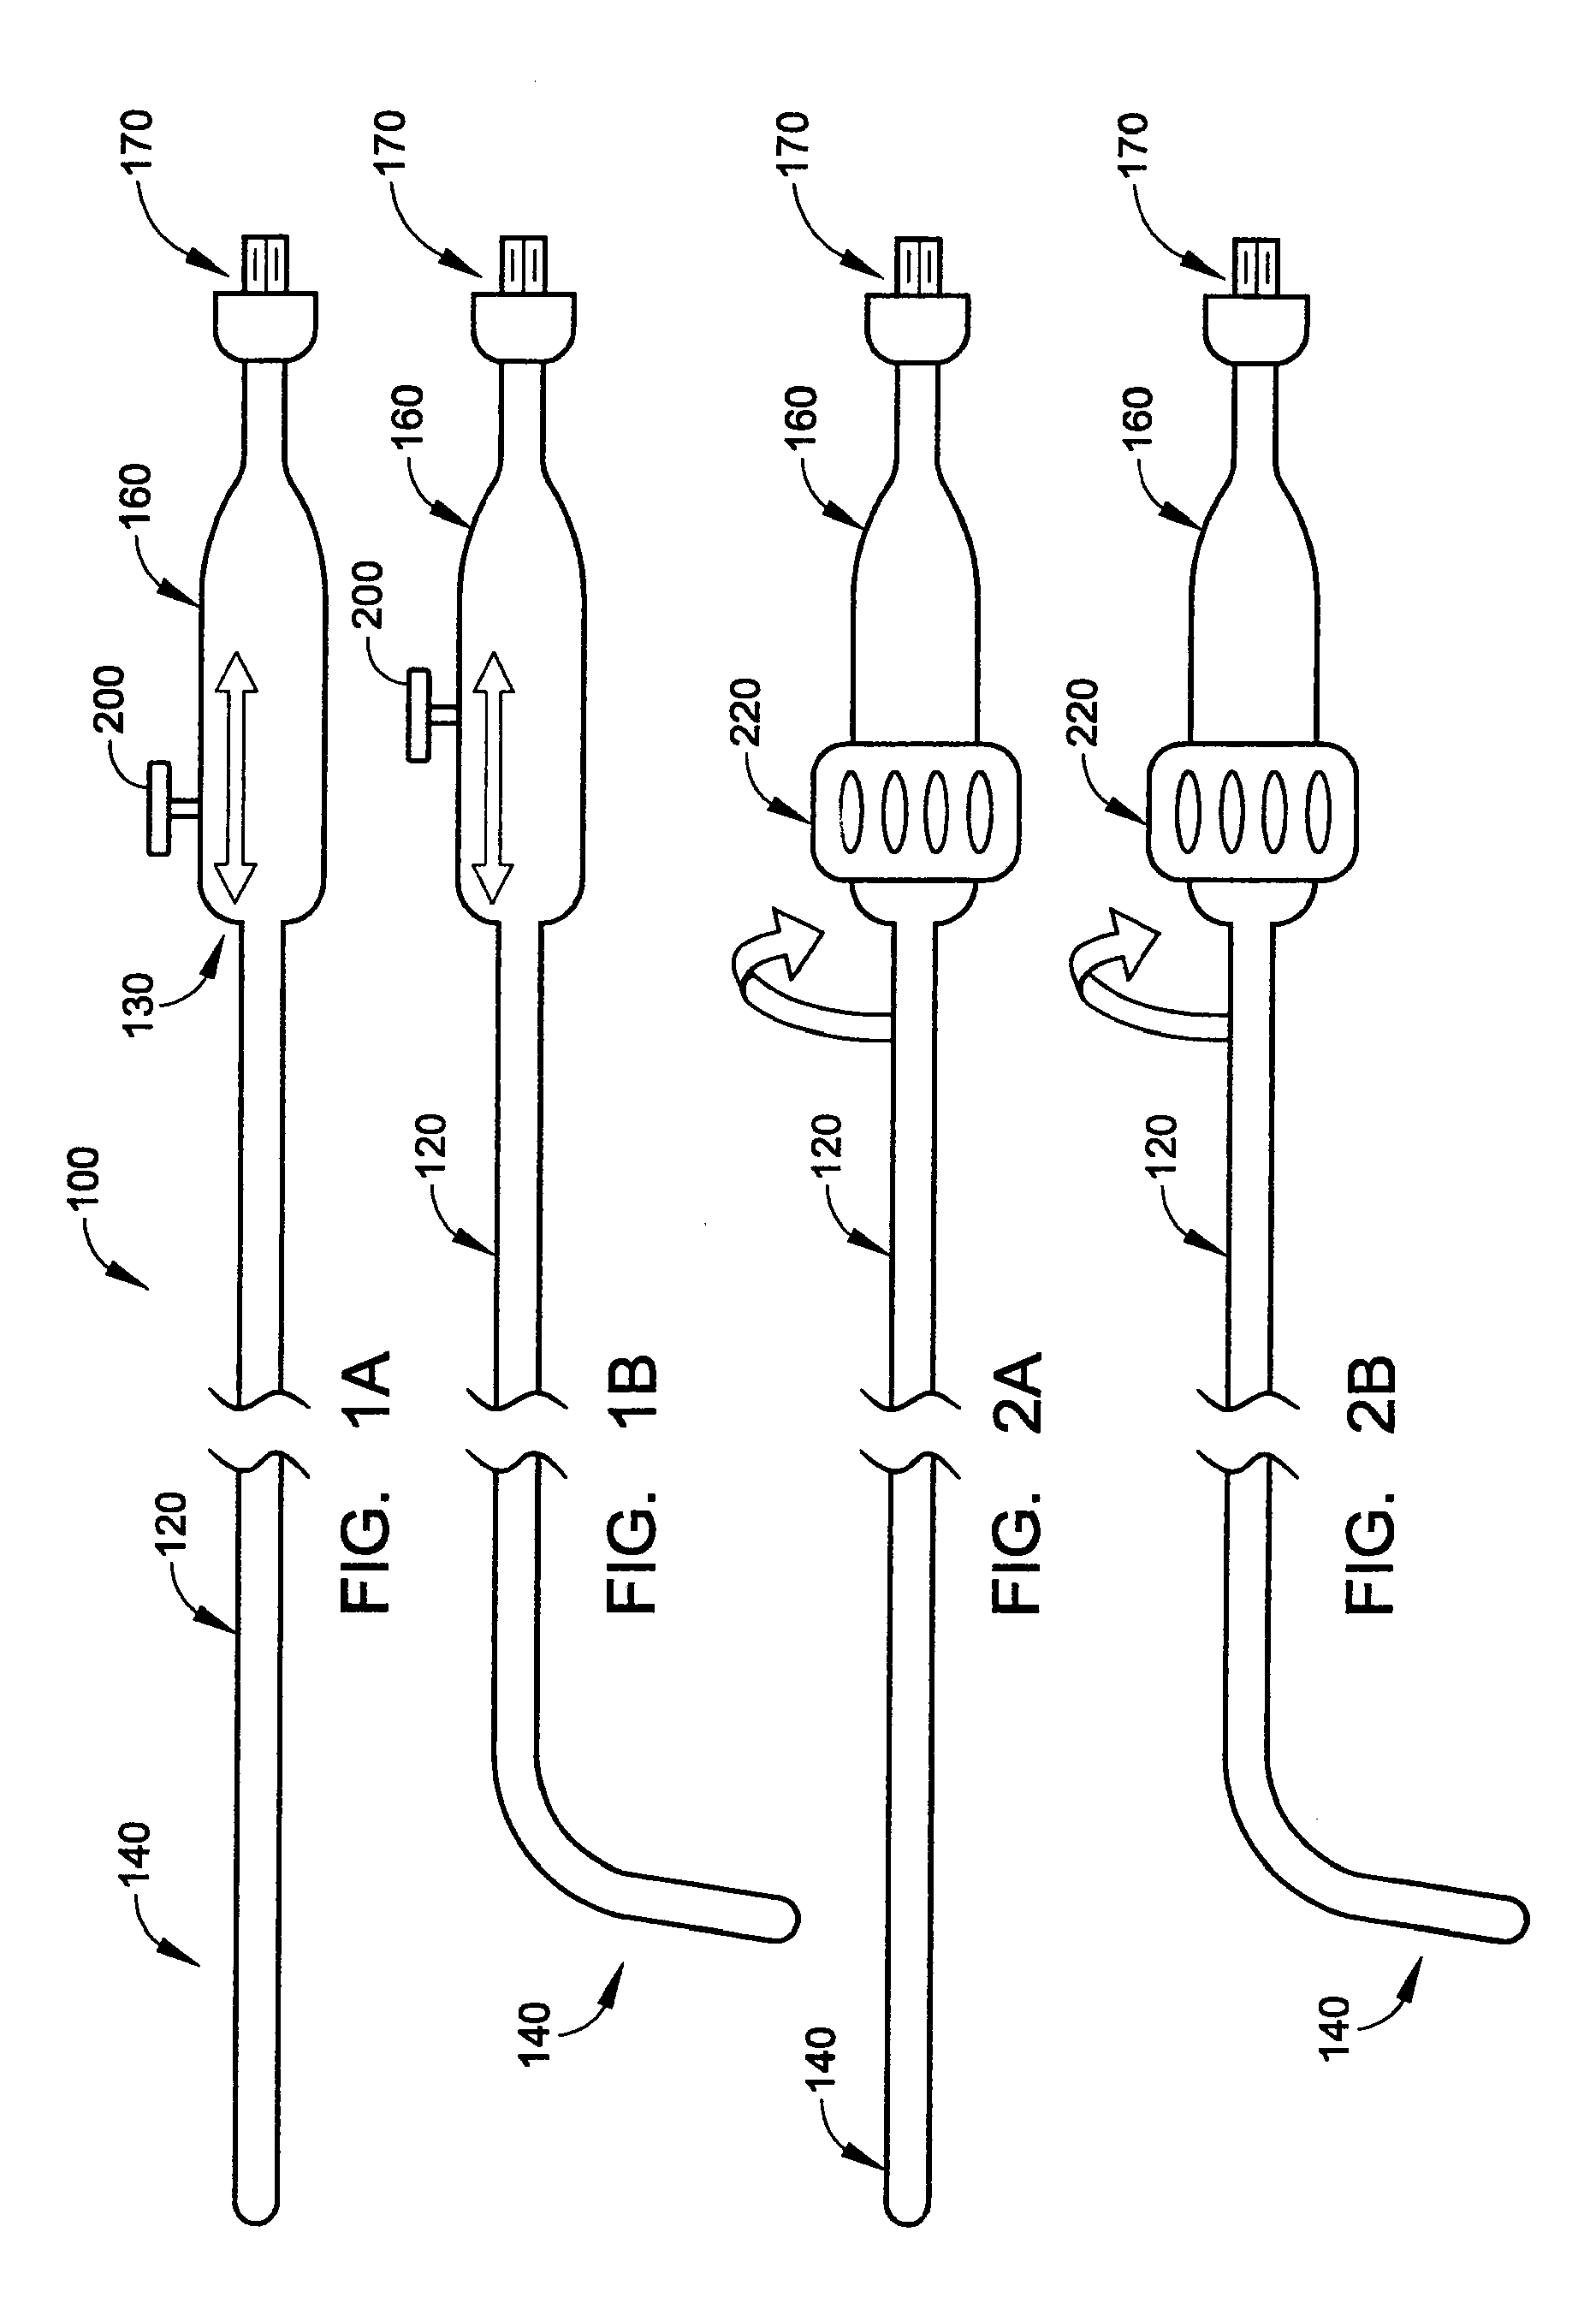 Ablation catheter apparatus with one or more electrodes